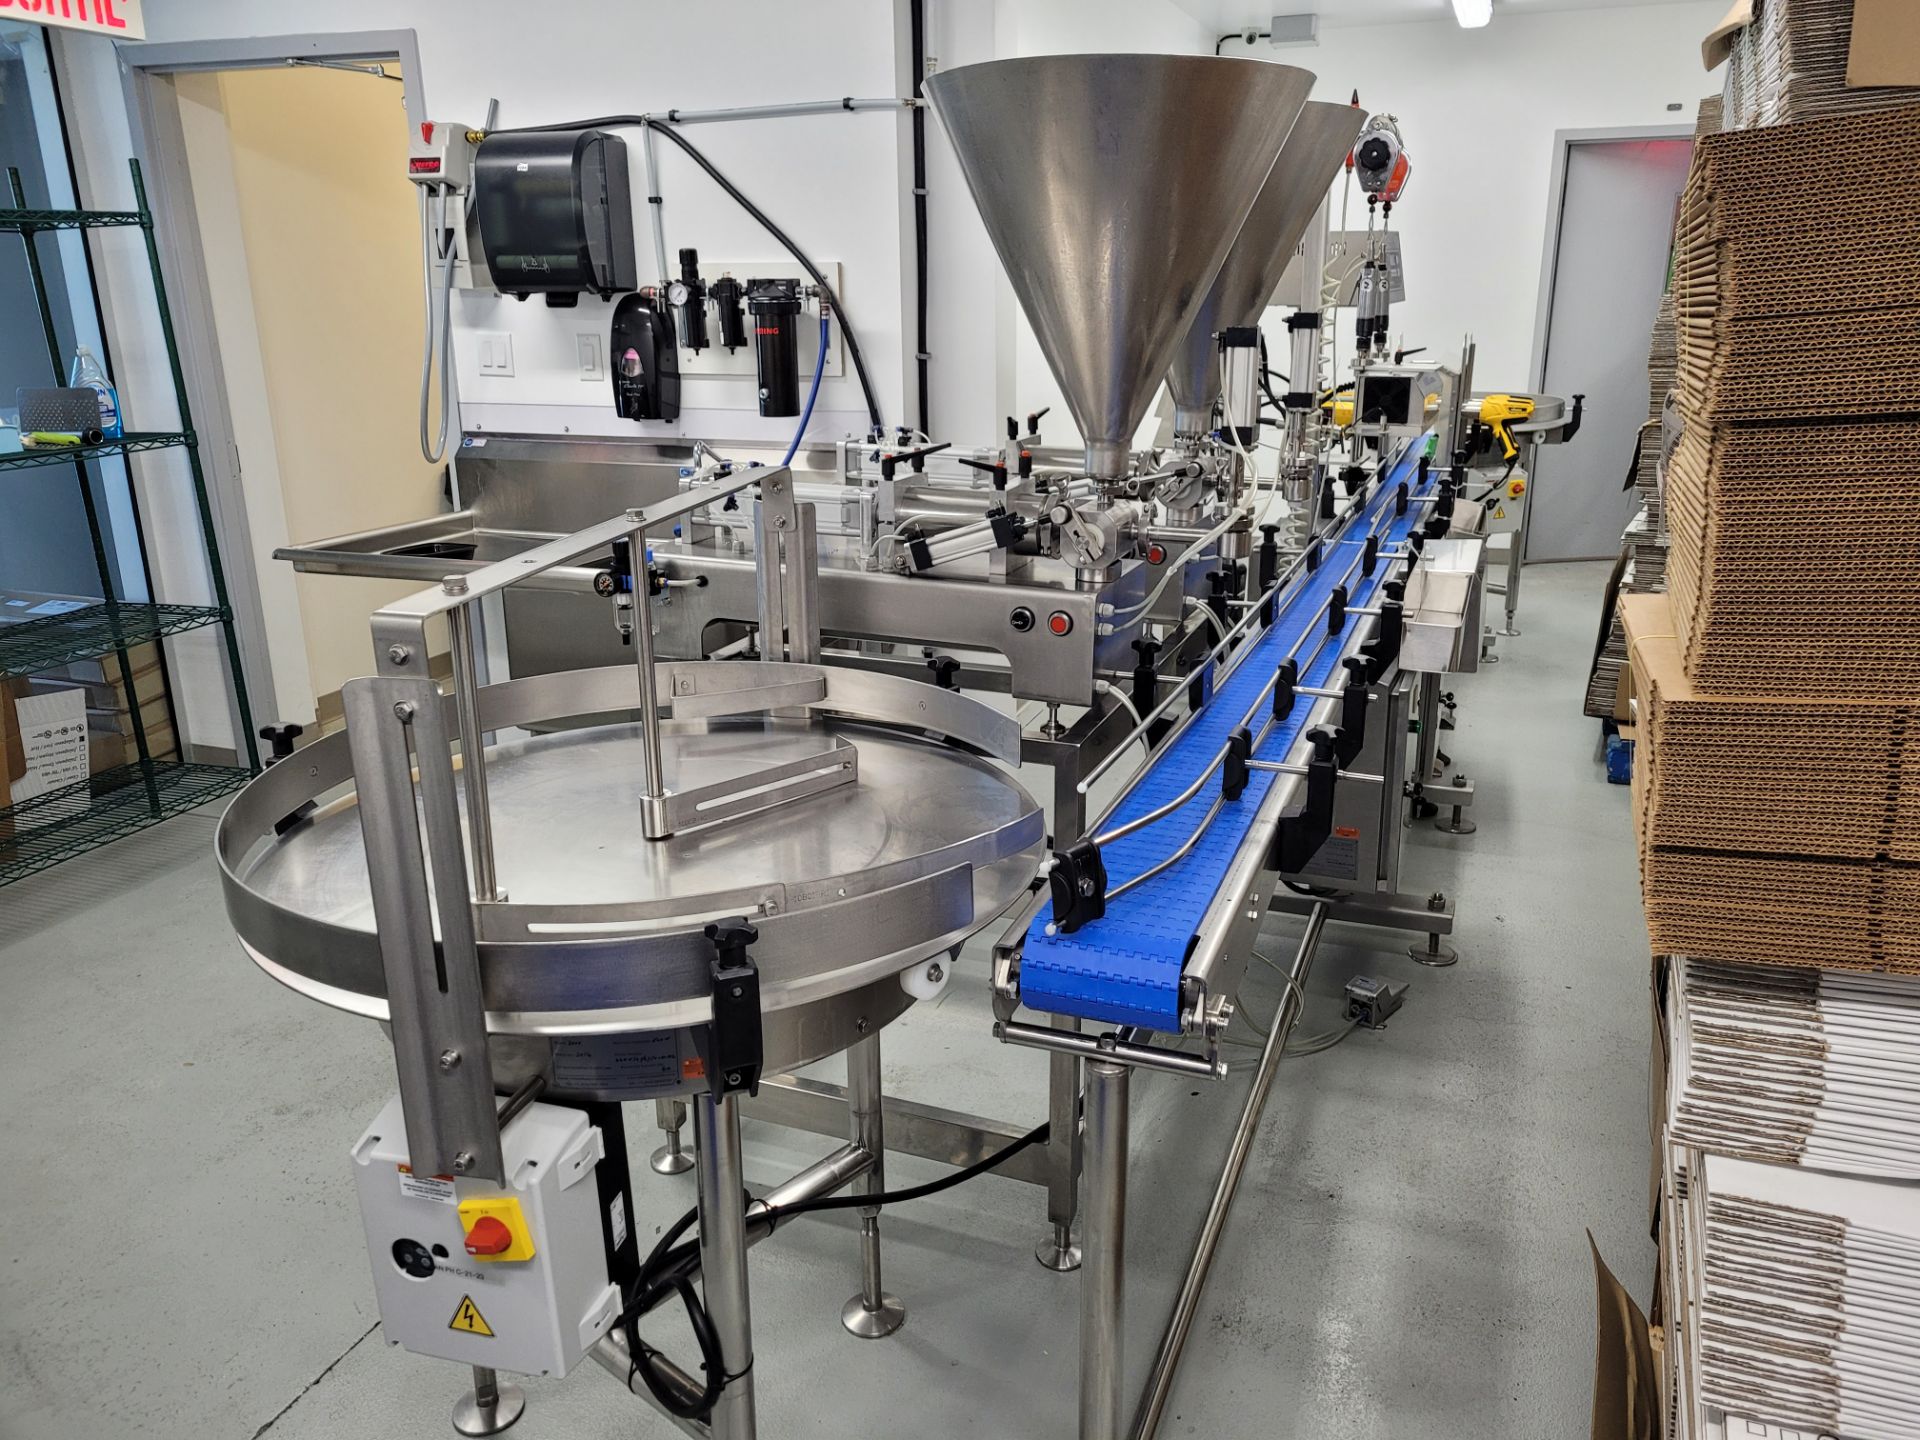 Complete 2019 ALFATEC Filling and Packaging Line (Bulk Bid for Lots 1 through 9)